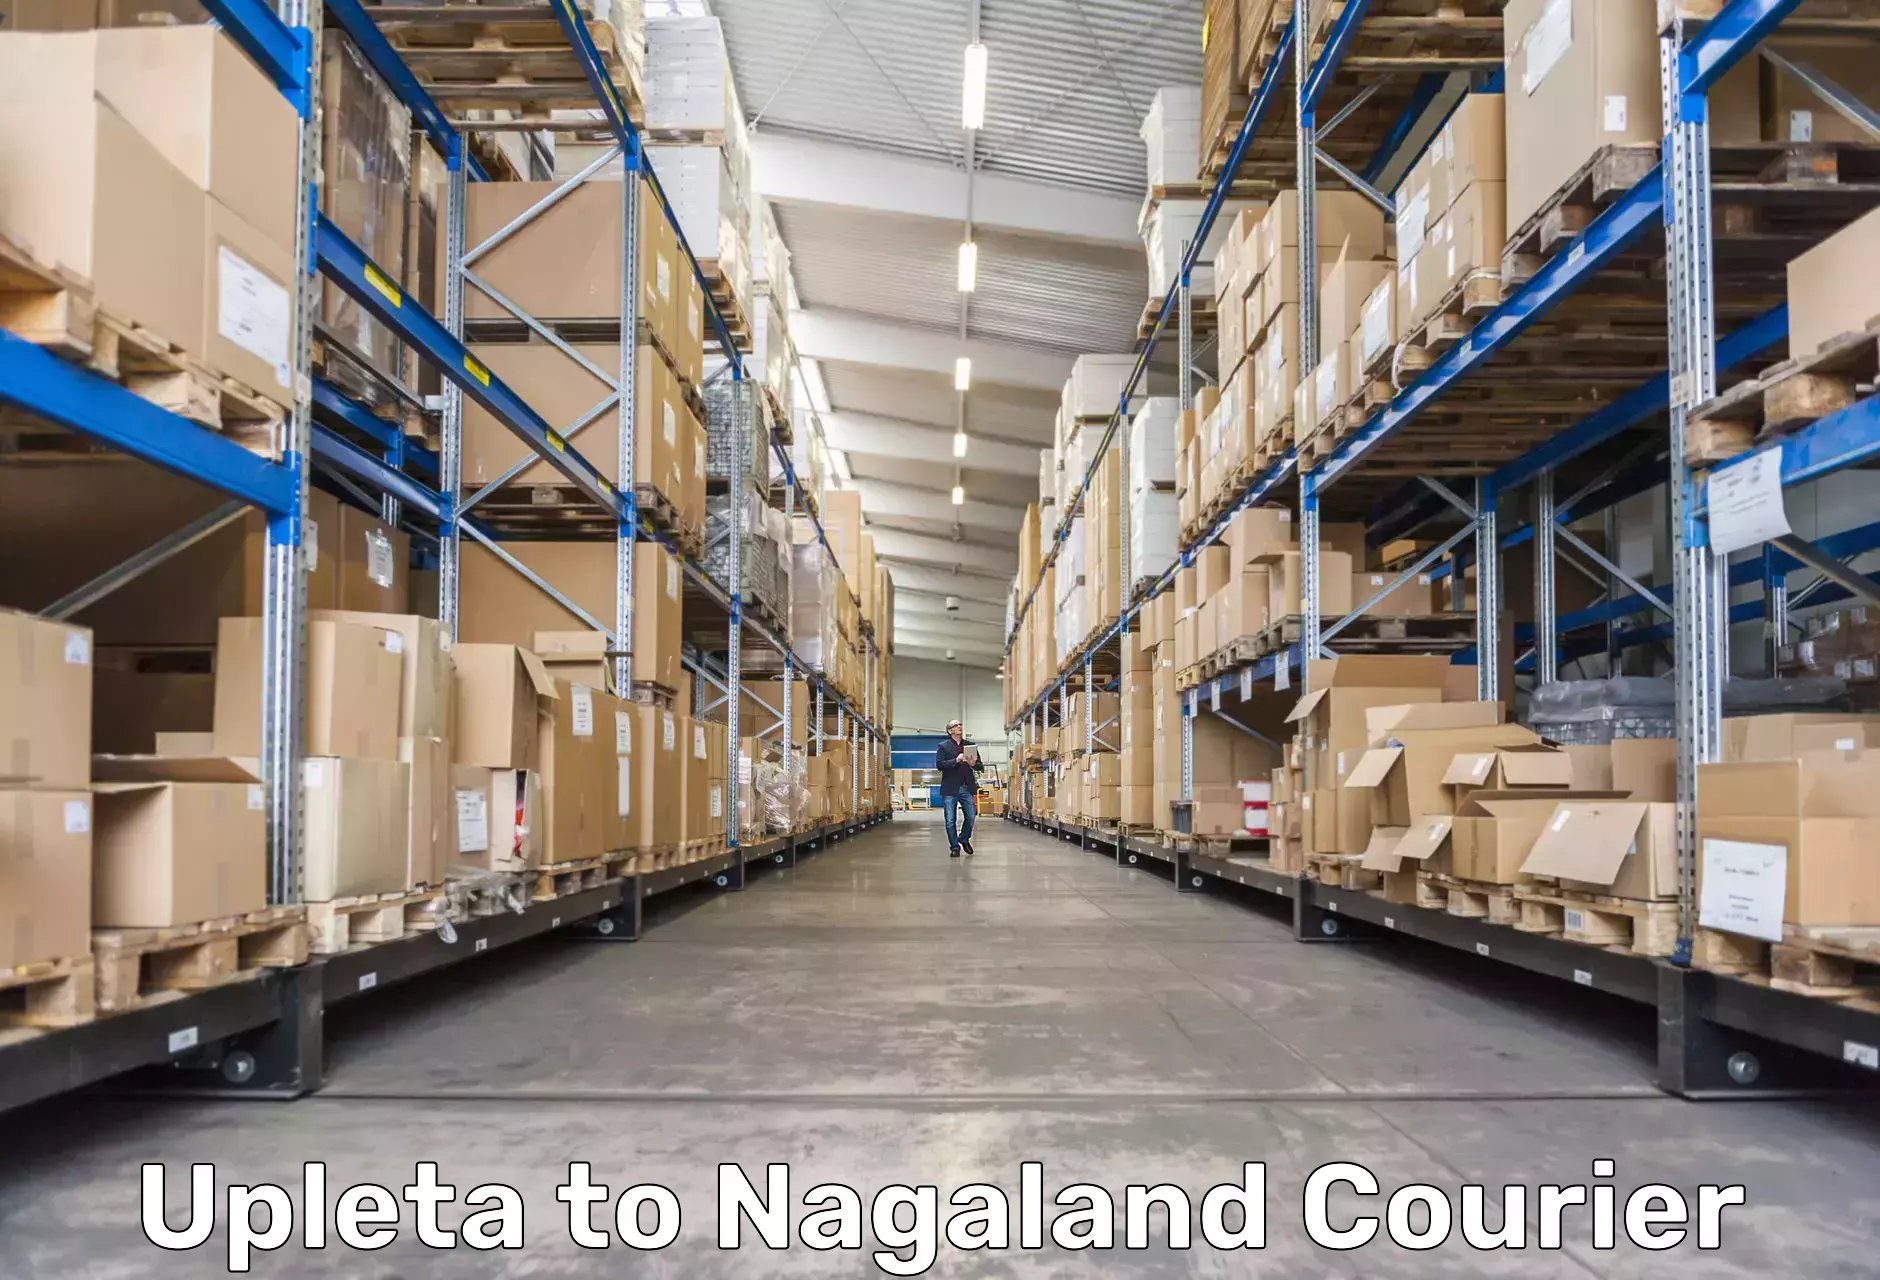 Personal parcel delivery Upleta to Nagaland